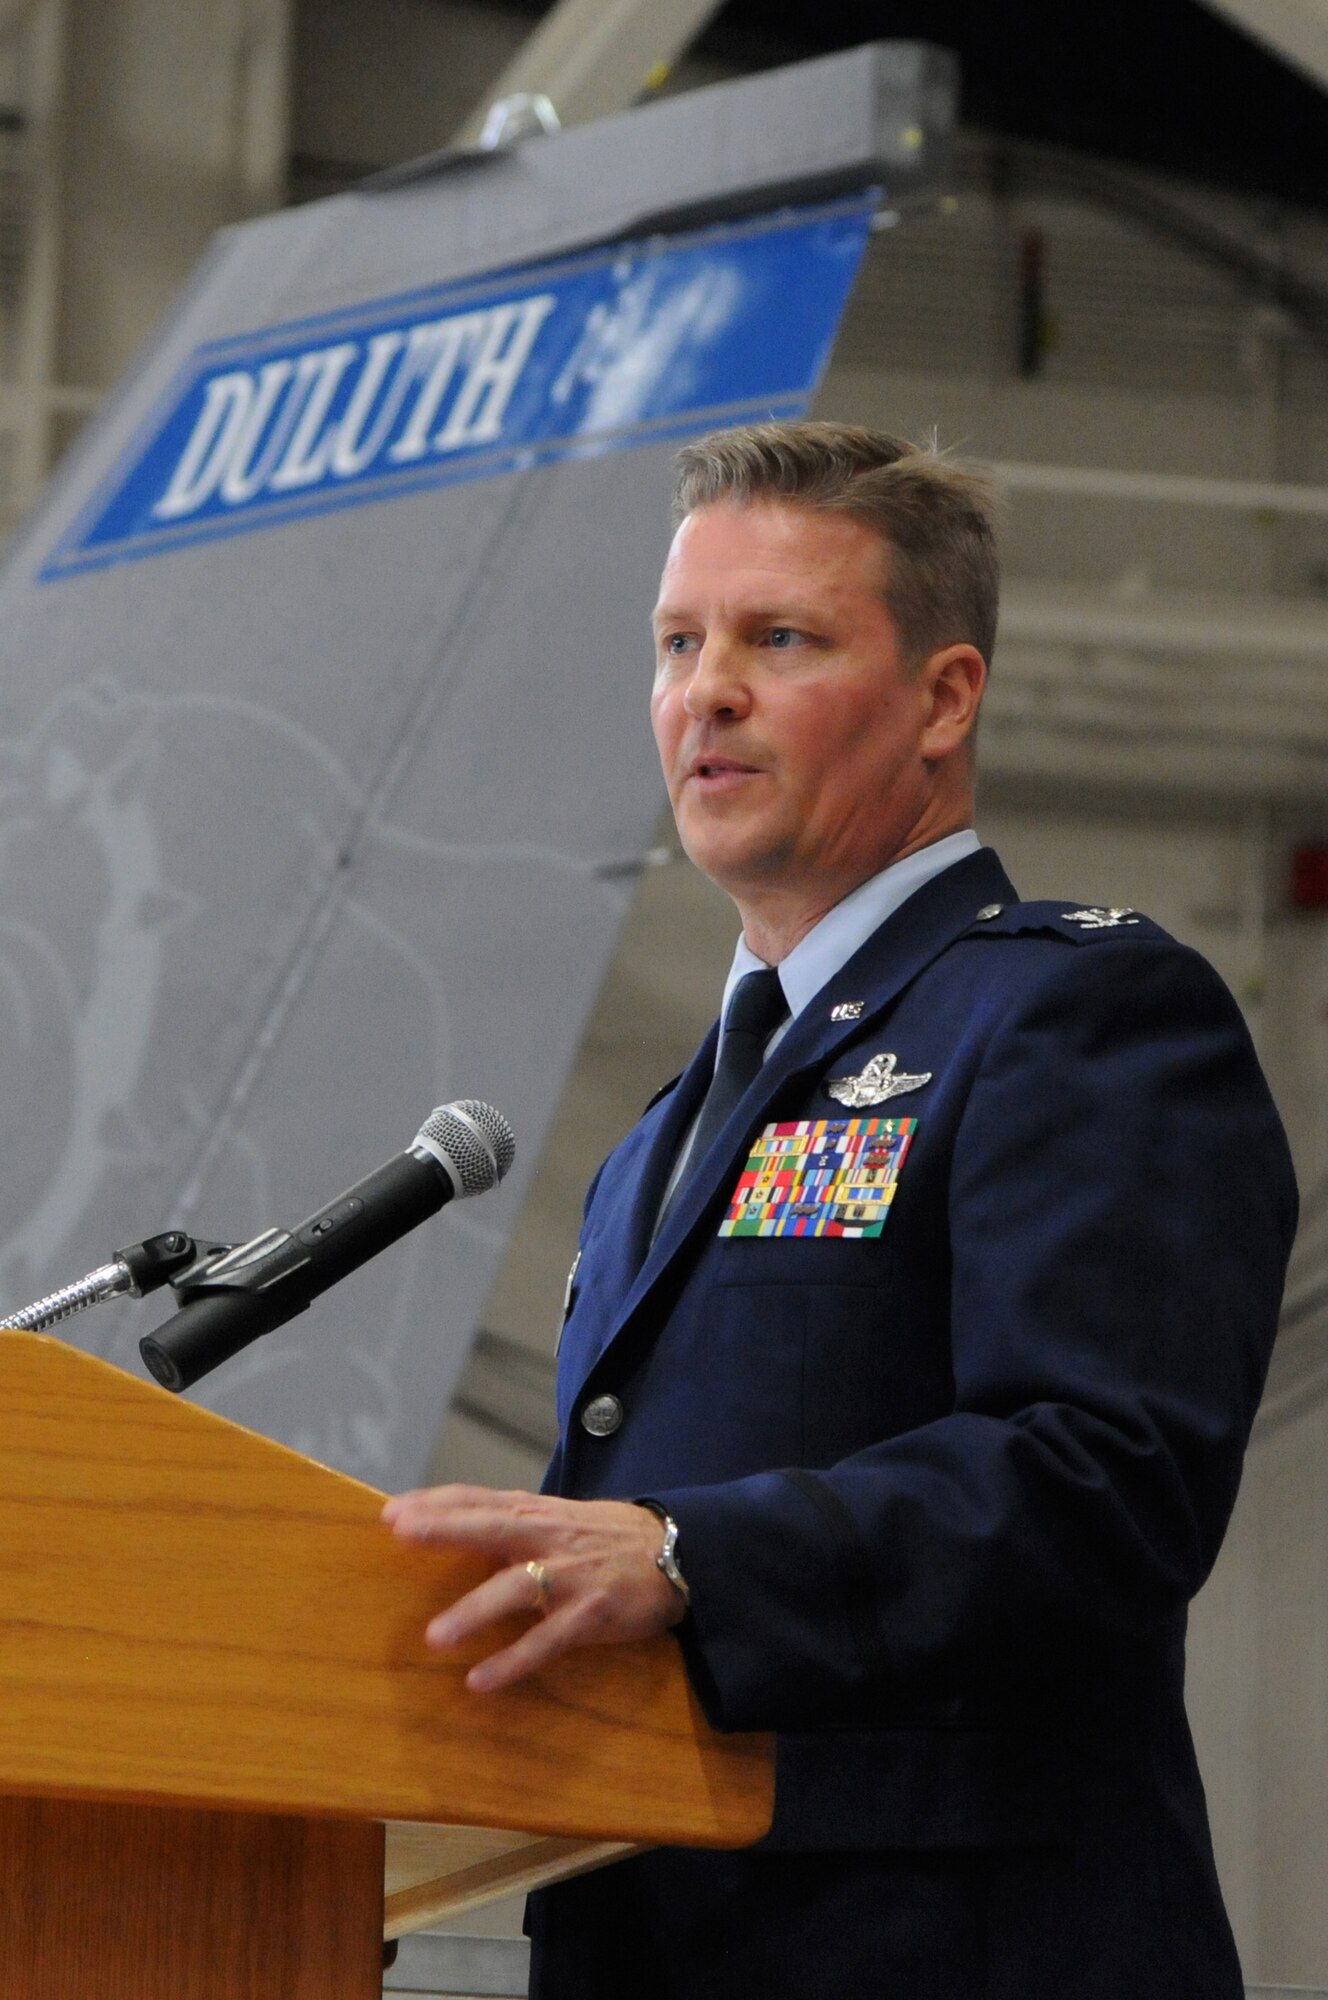 Col. Jon S. Safstrom addresses Airmen from the 148th Fighter Wing, Duluth, Minn. for the first time as their new wing commander, Nov. 14, 2015. Safstrom assumed command from Col. Frank H. Stokes who accepted a position at the National Guard Bureau, Arlington, Va. (U.S. Air Force photo by Tech. Sgt. Amie Muller/released)